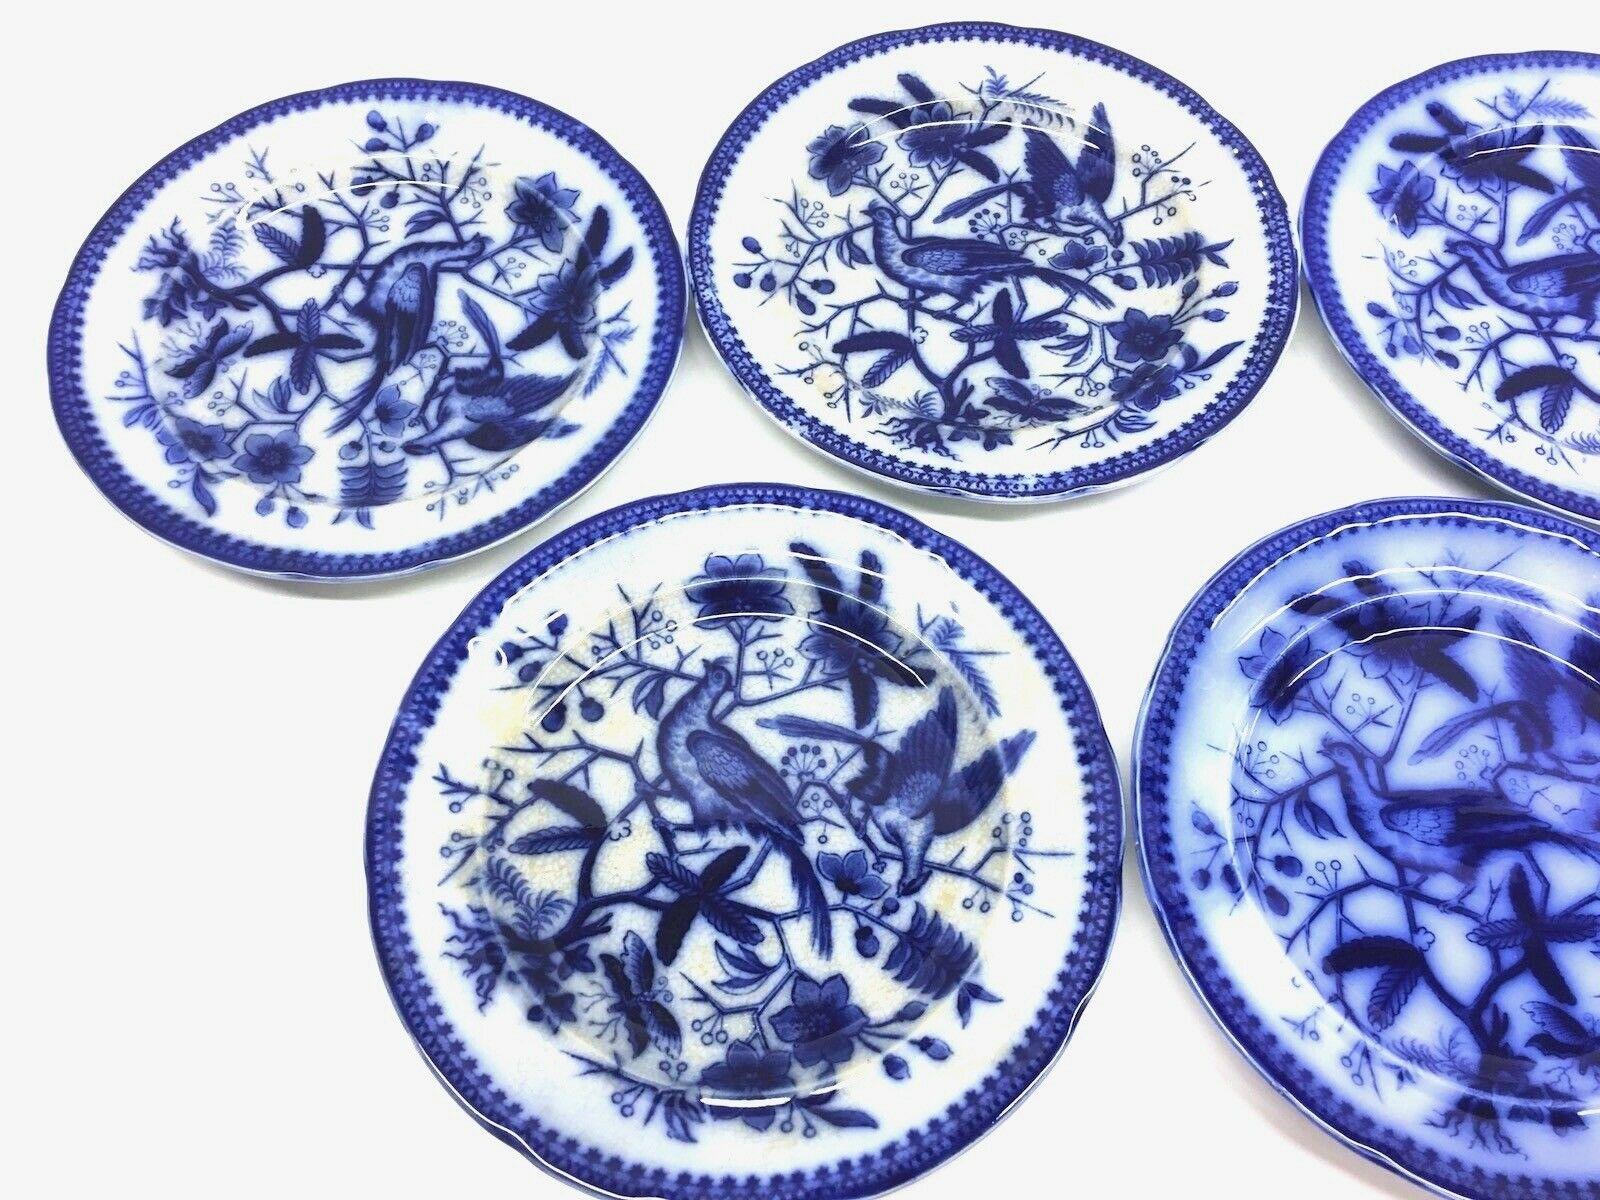 A set of five porcelain flow blue plates, made by Villeroy & Boch, Germany, circa 1890s or older.
Images show a hand painted Pheasant pattern. This is a set of six plates, very nice for your table. Signed on the base.